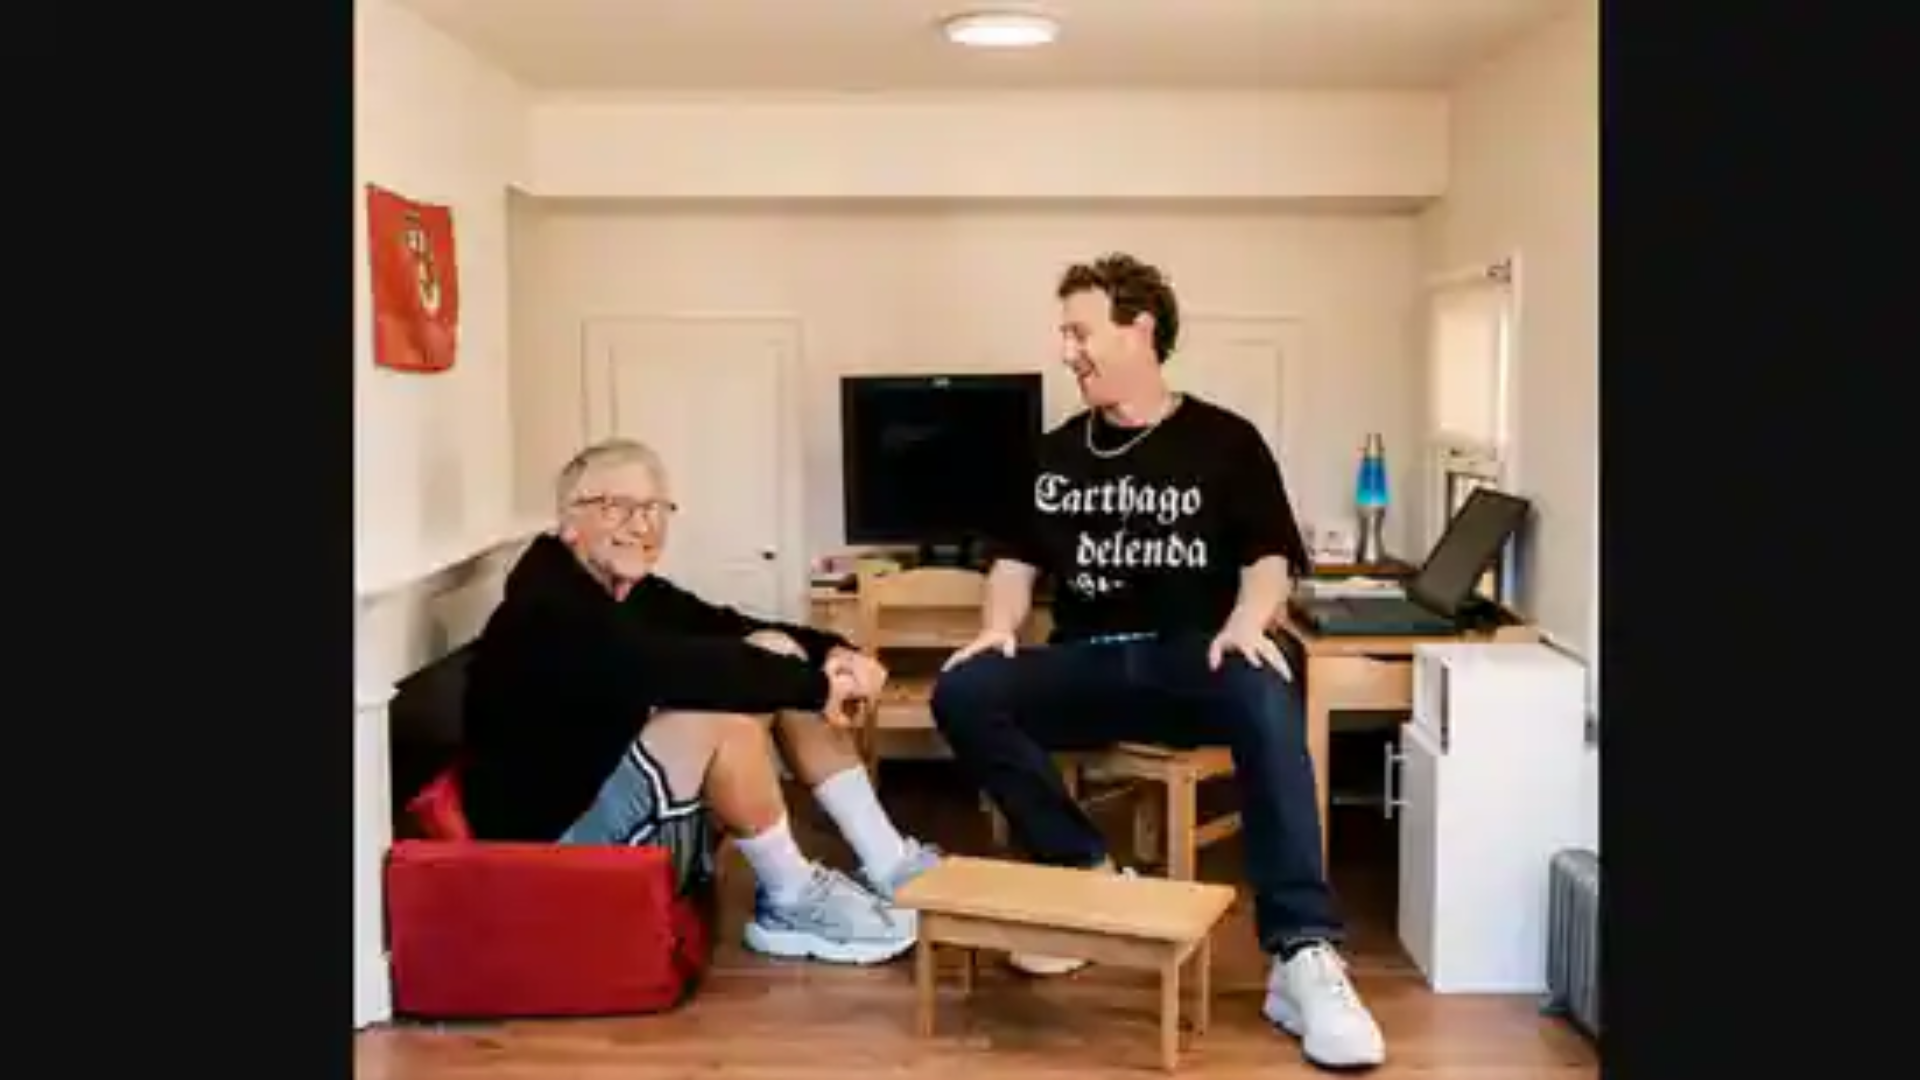 Mark Zuckerberg Shares Pictures From His 40th Birthday Celebration With Bill Gates